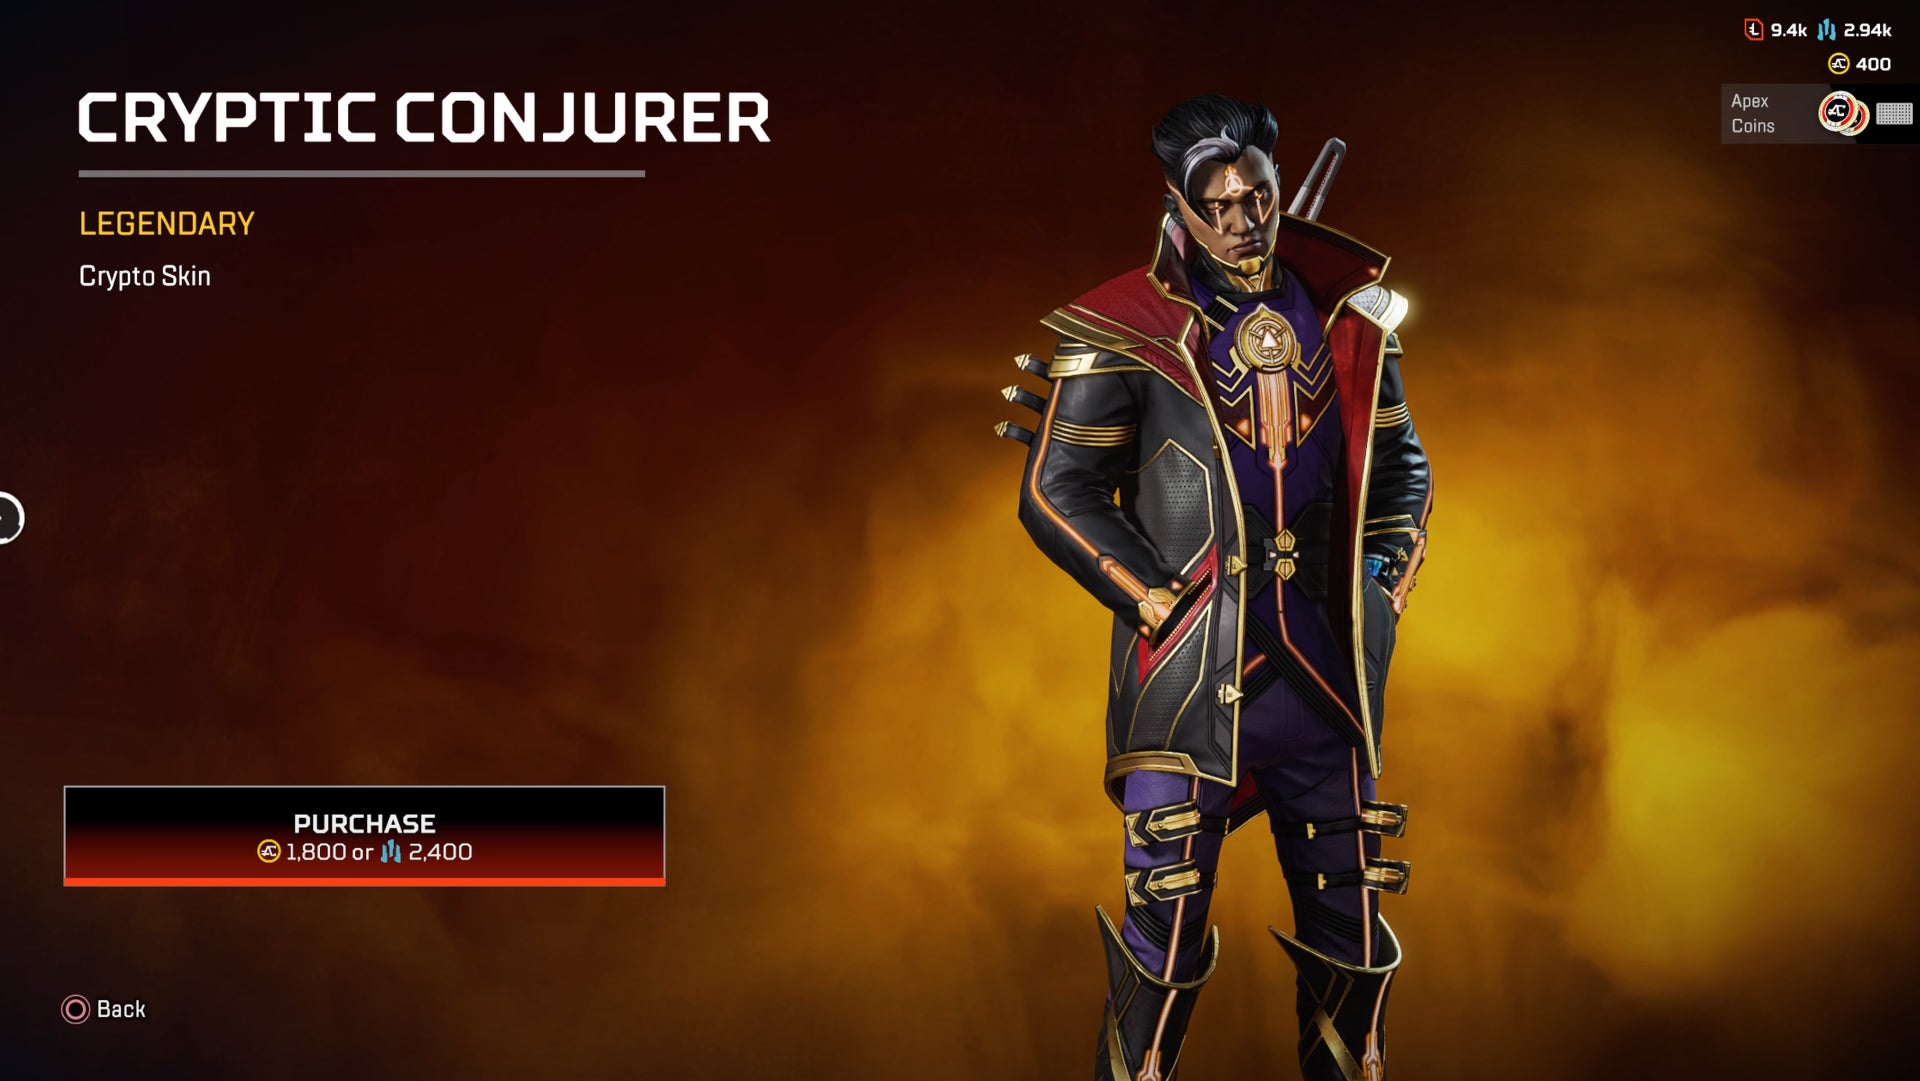 Apex Legends Cryptic Conjurer skin for Crypto